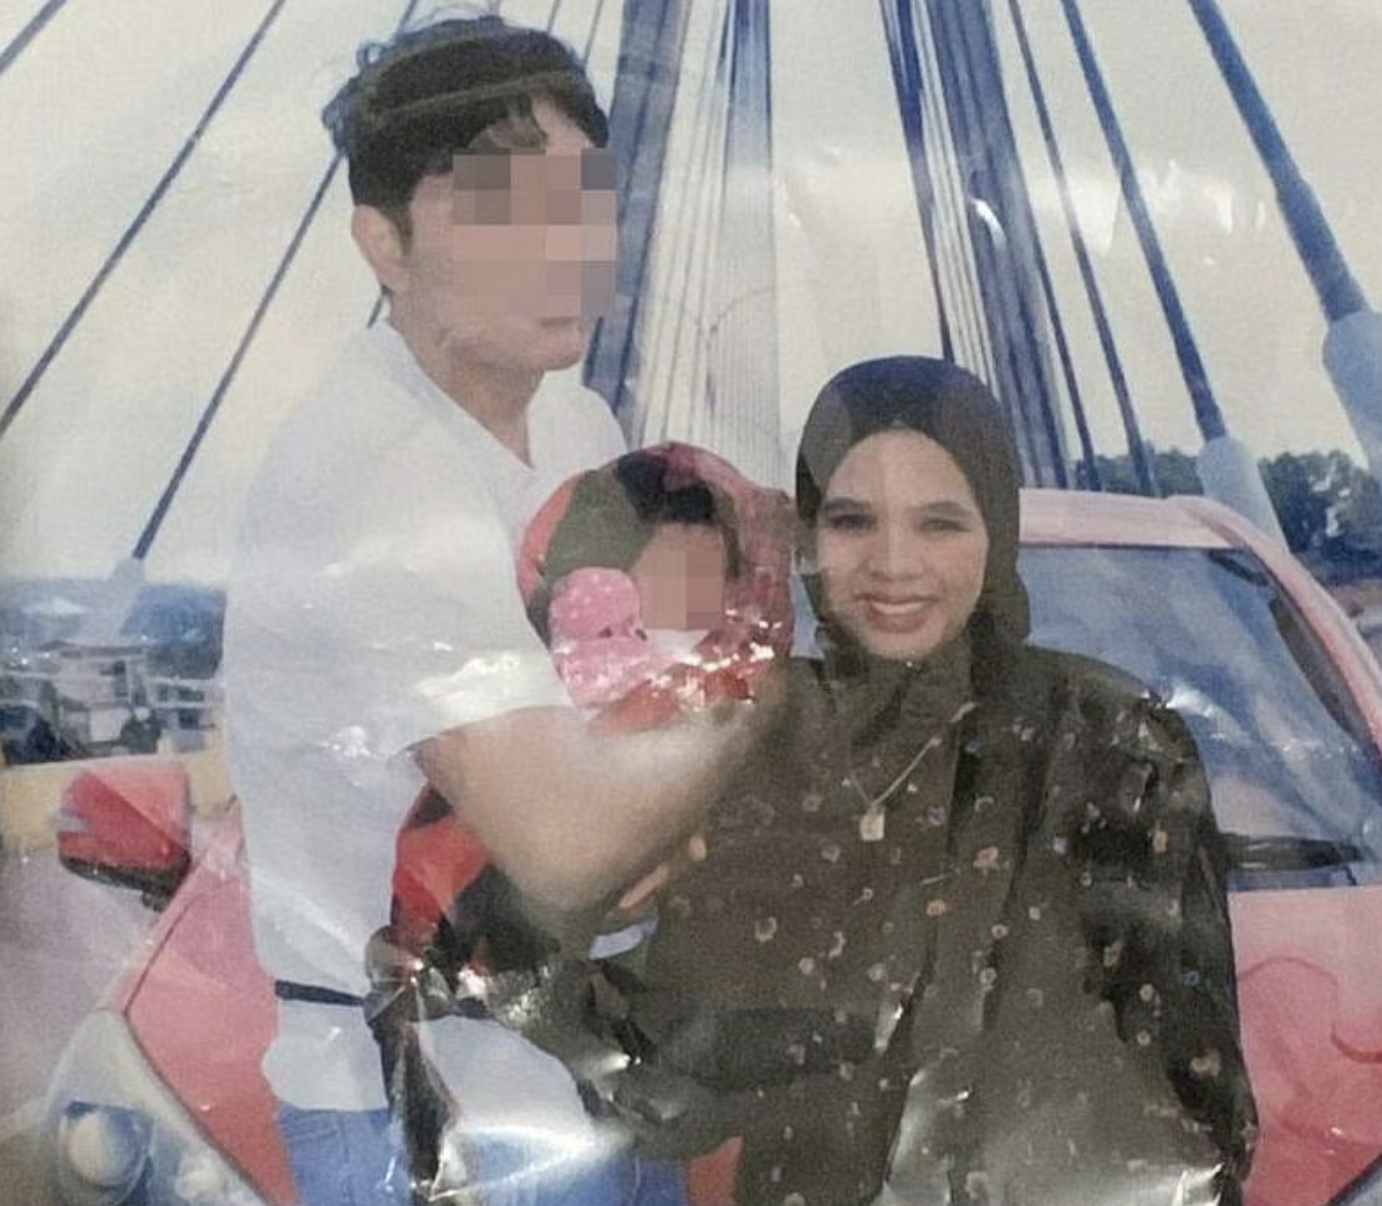 Indonesian woman travels to singapore to injure m'sian husband who asked for divorce with hot water